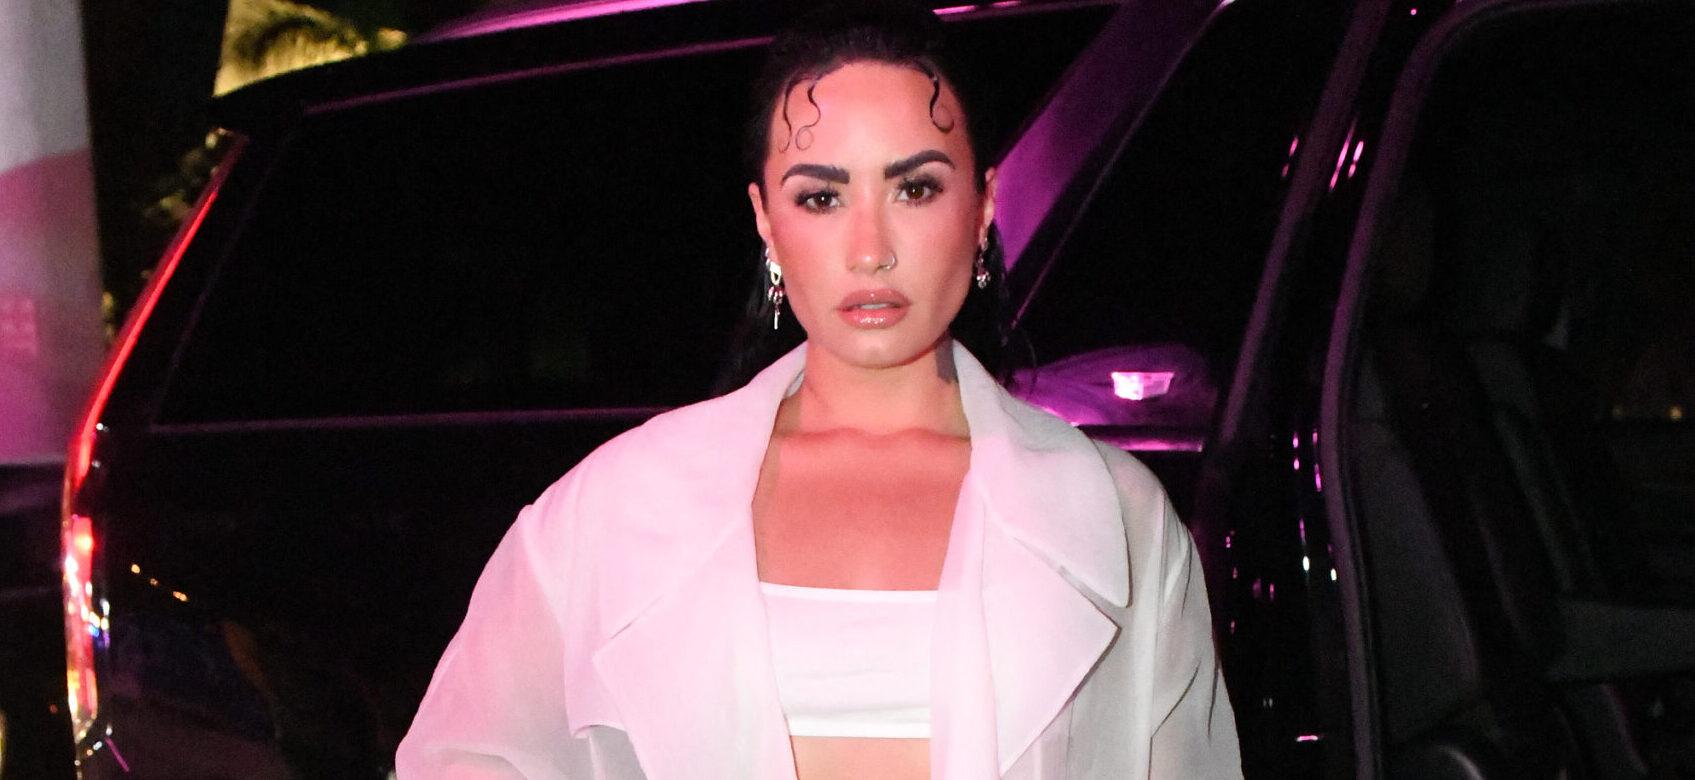 Demi Lovato arrives along with other celebrities to the Hugo Boss fashion show in Miami